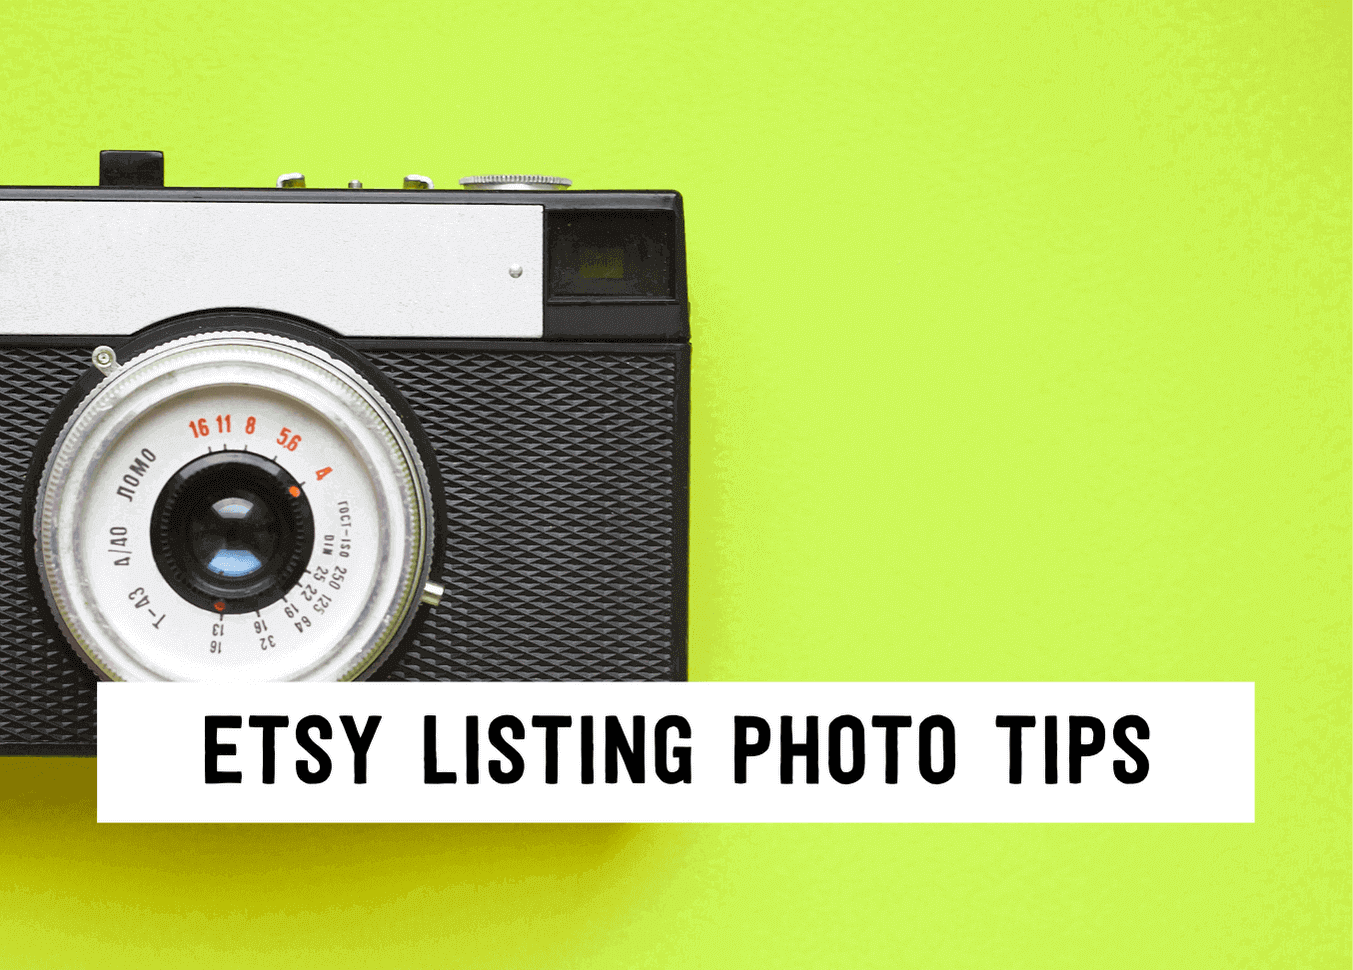 Etsy listing photo tips | Tizzit.co - start and grow a successful handmade business